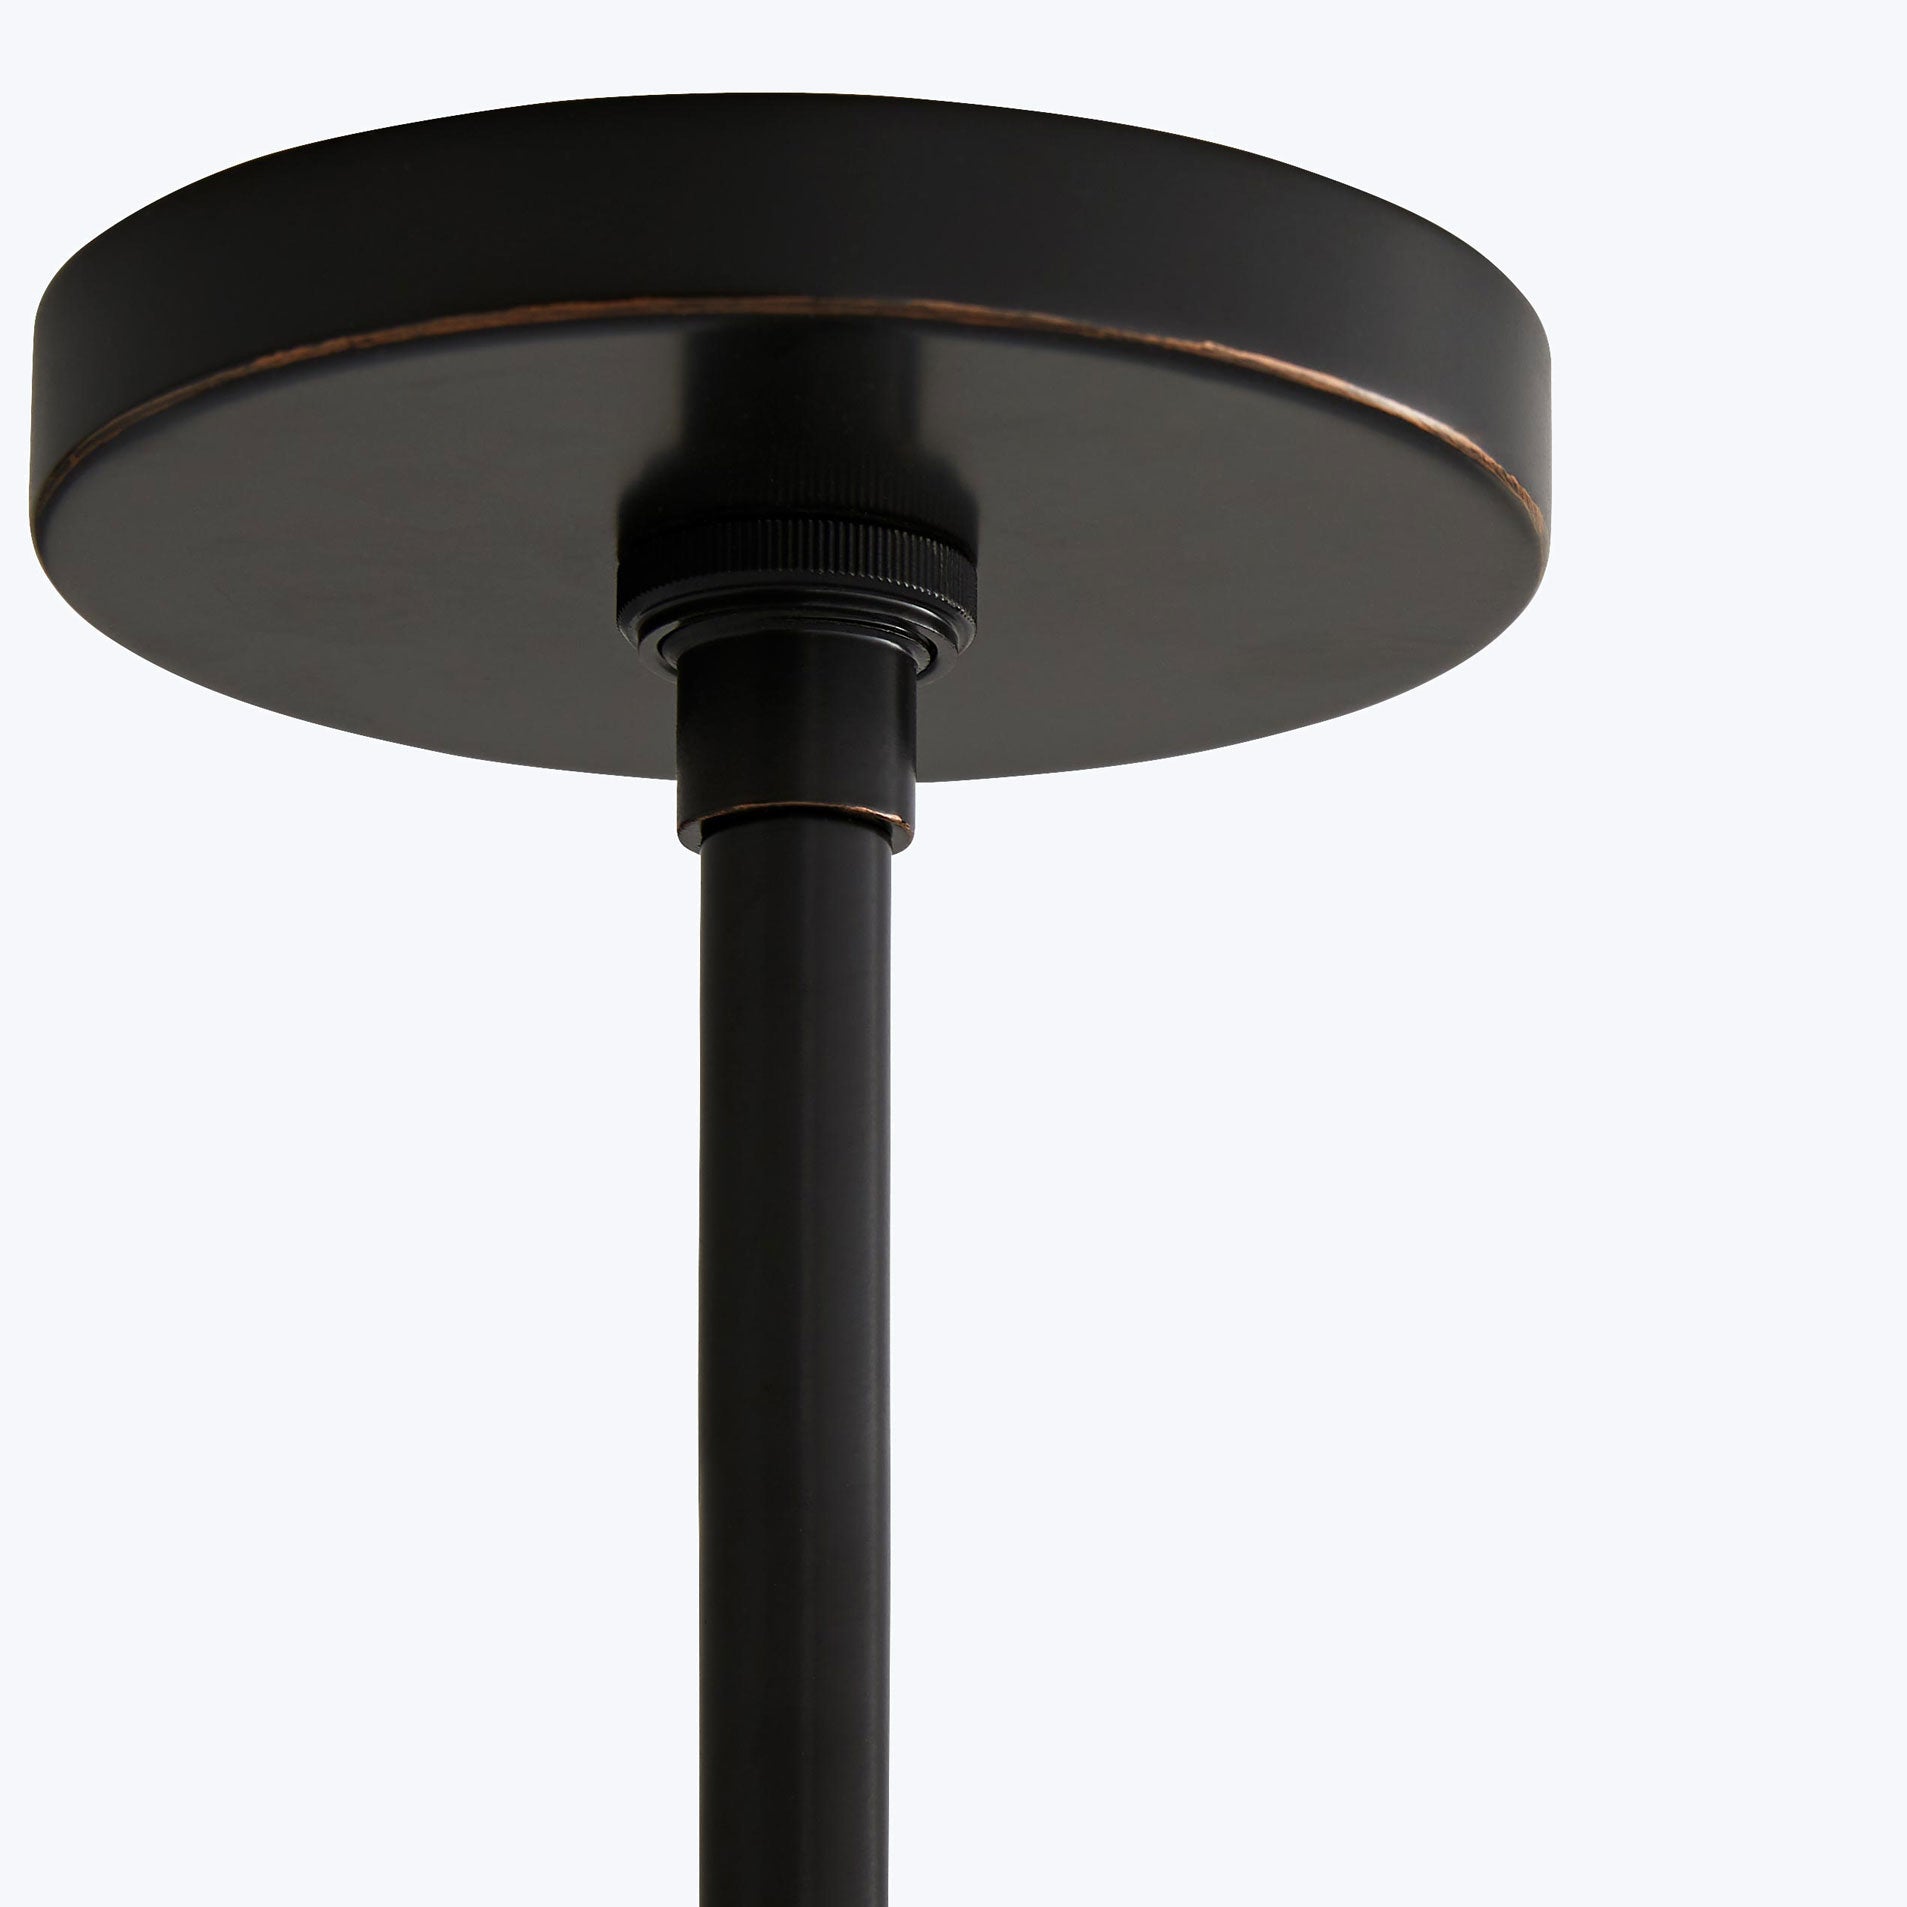 Close-up view of a minimalist black floor lamp with bronze accents.